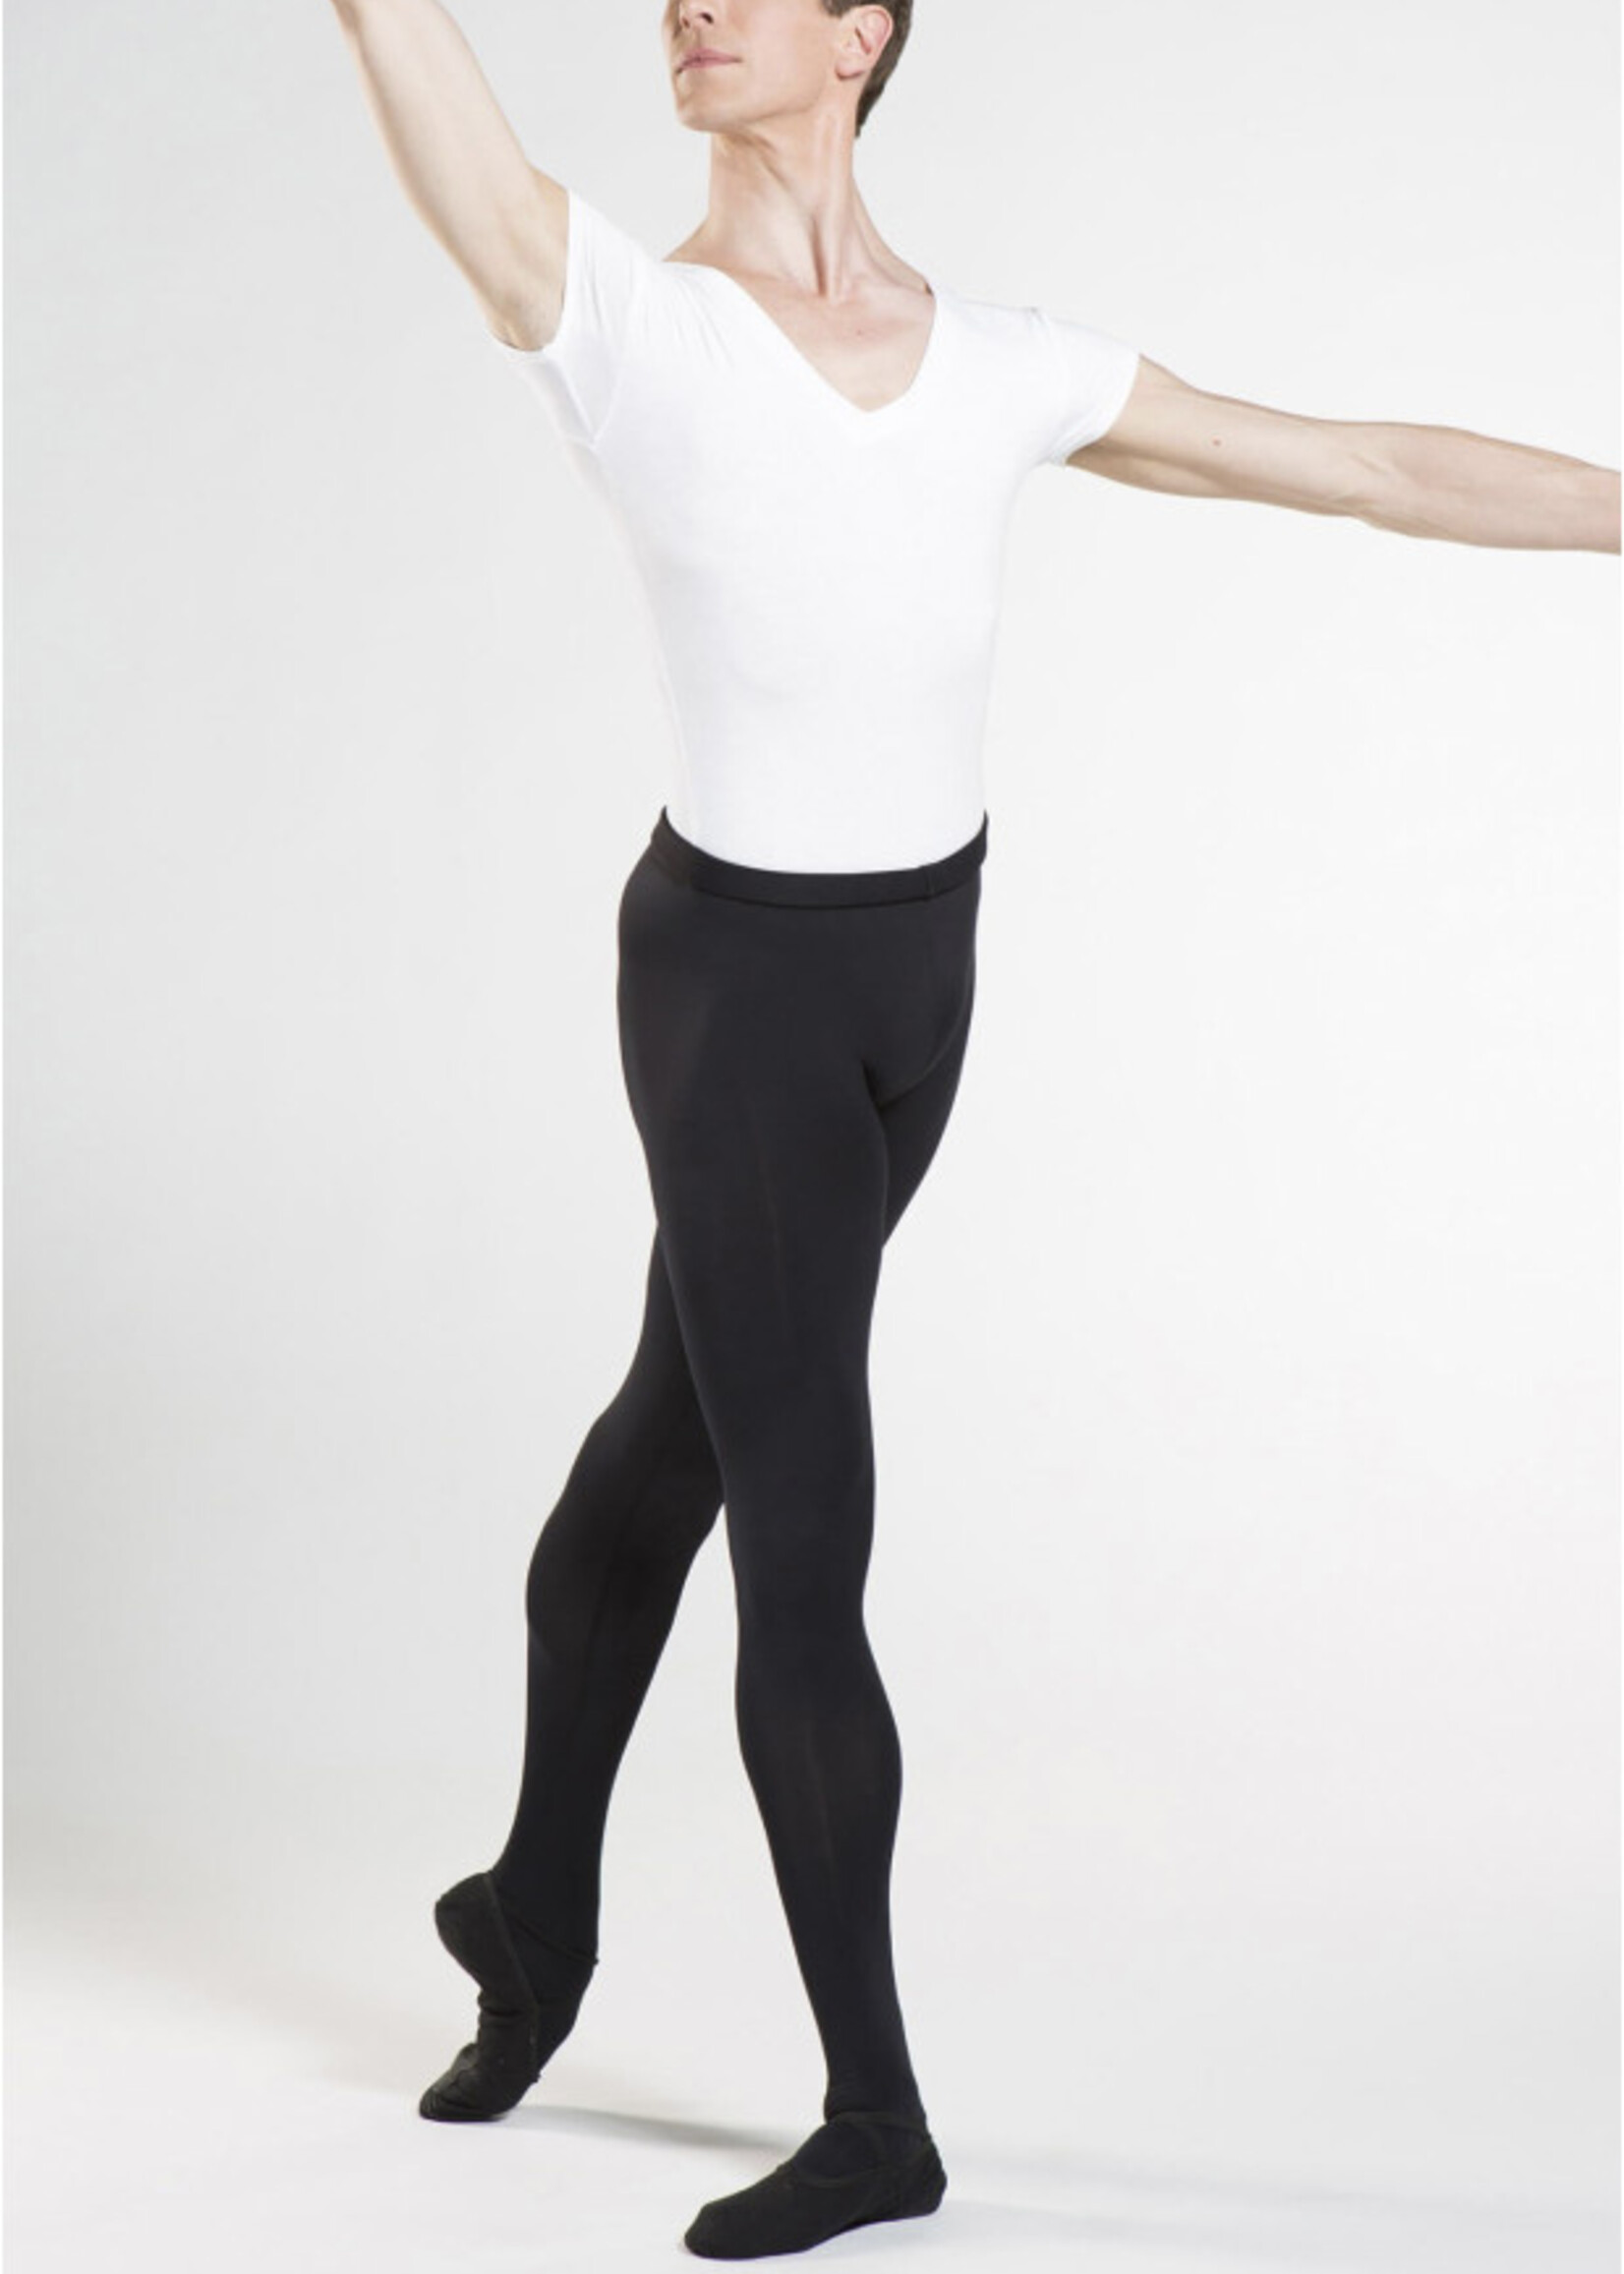 Mens Solo Cotton Footed Tights - Tights - Footed Tights